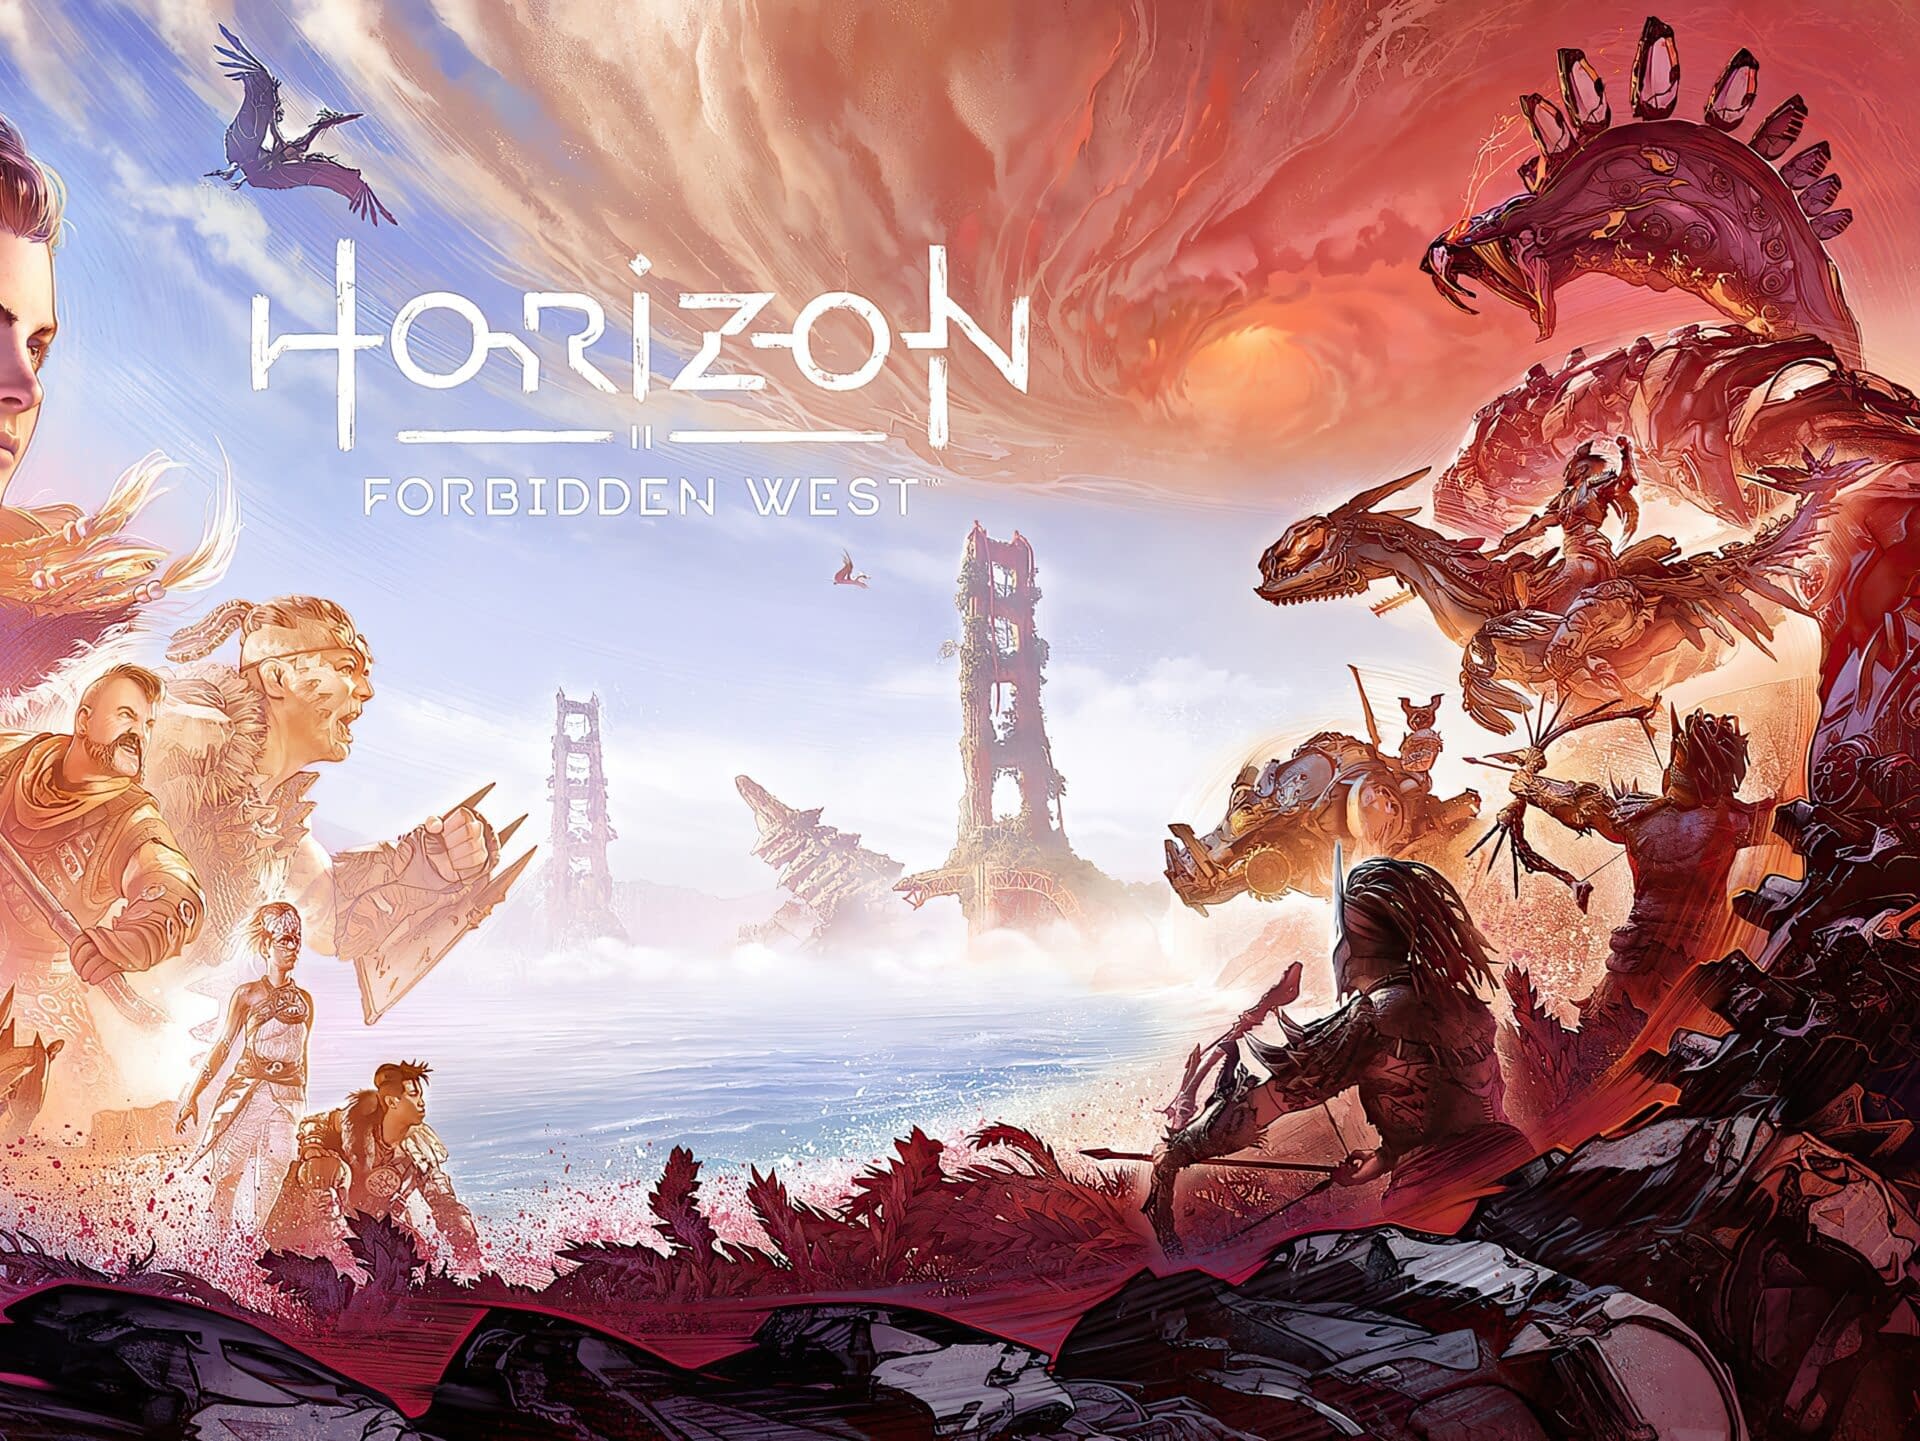 Horizon Forbidden West Announced For PC: Released Year Announced!